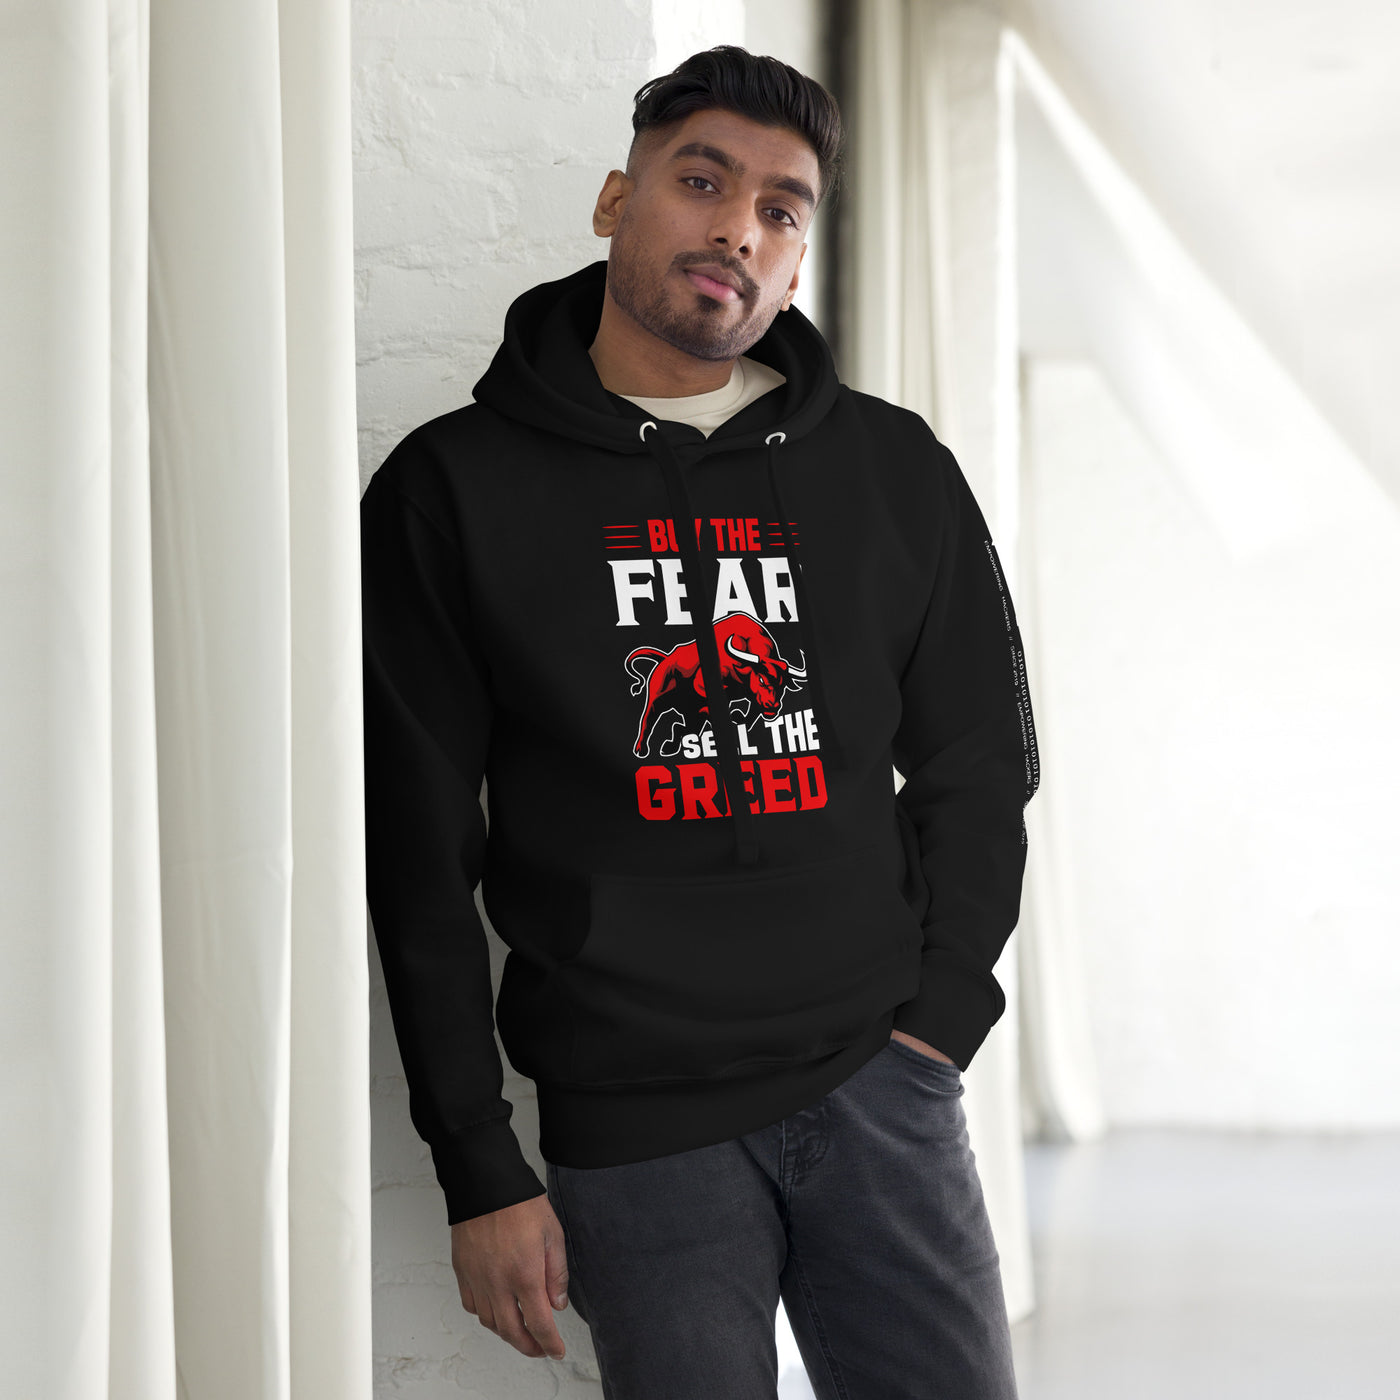 Buy the Fear; Sell the Greed V1 - Unisex Hoodie